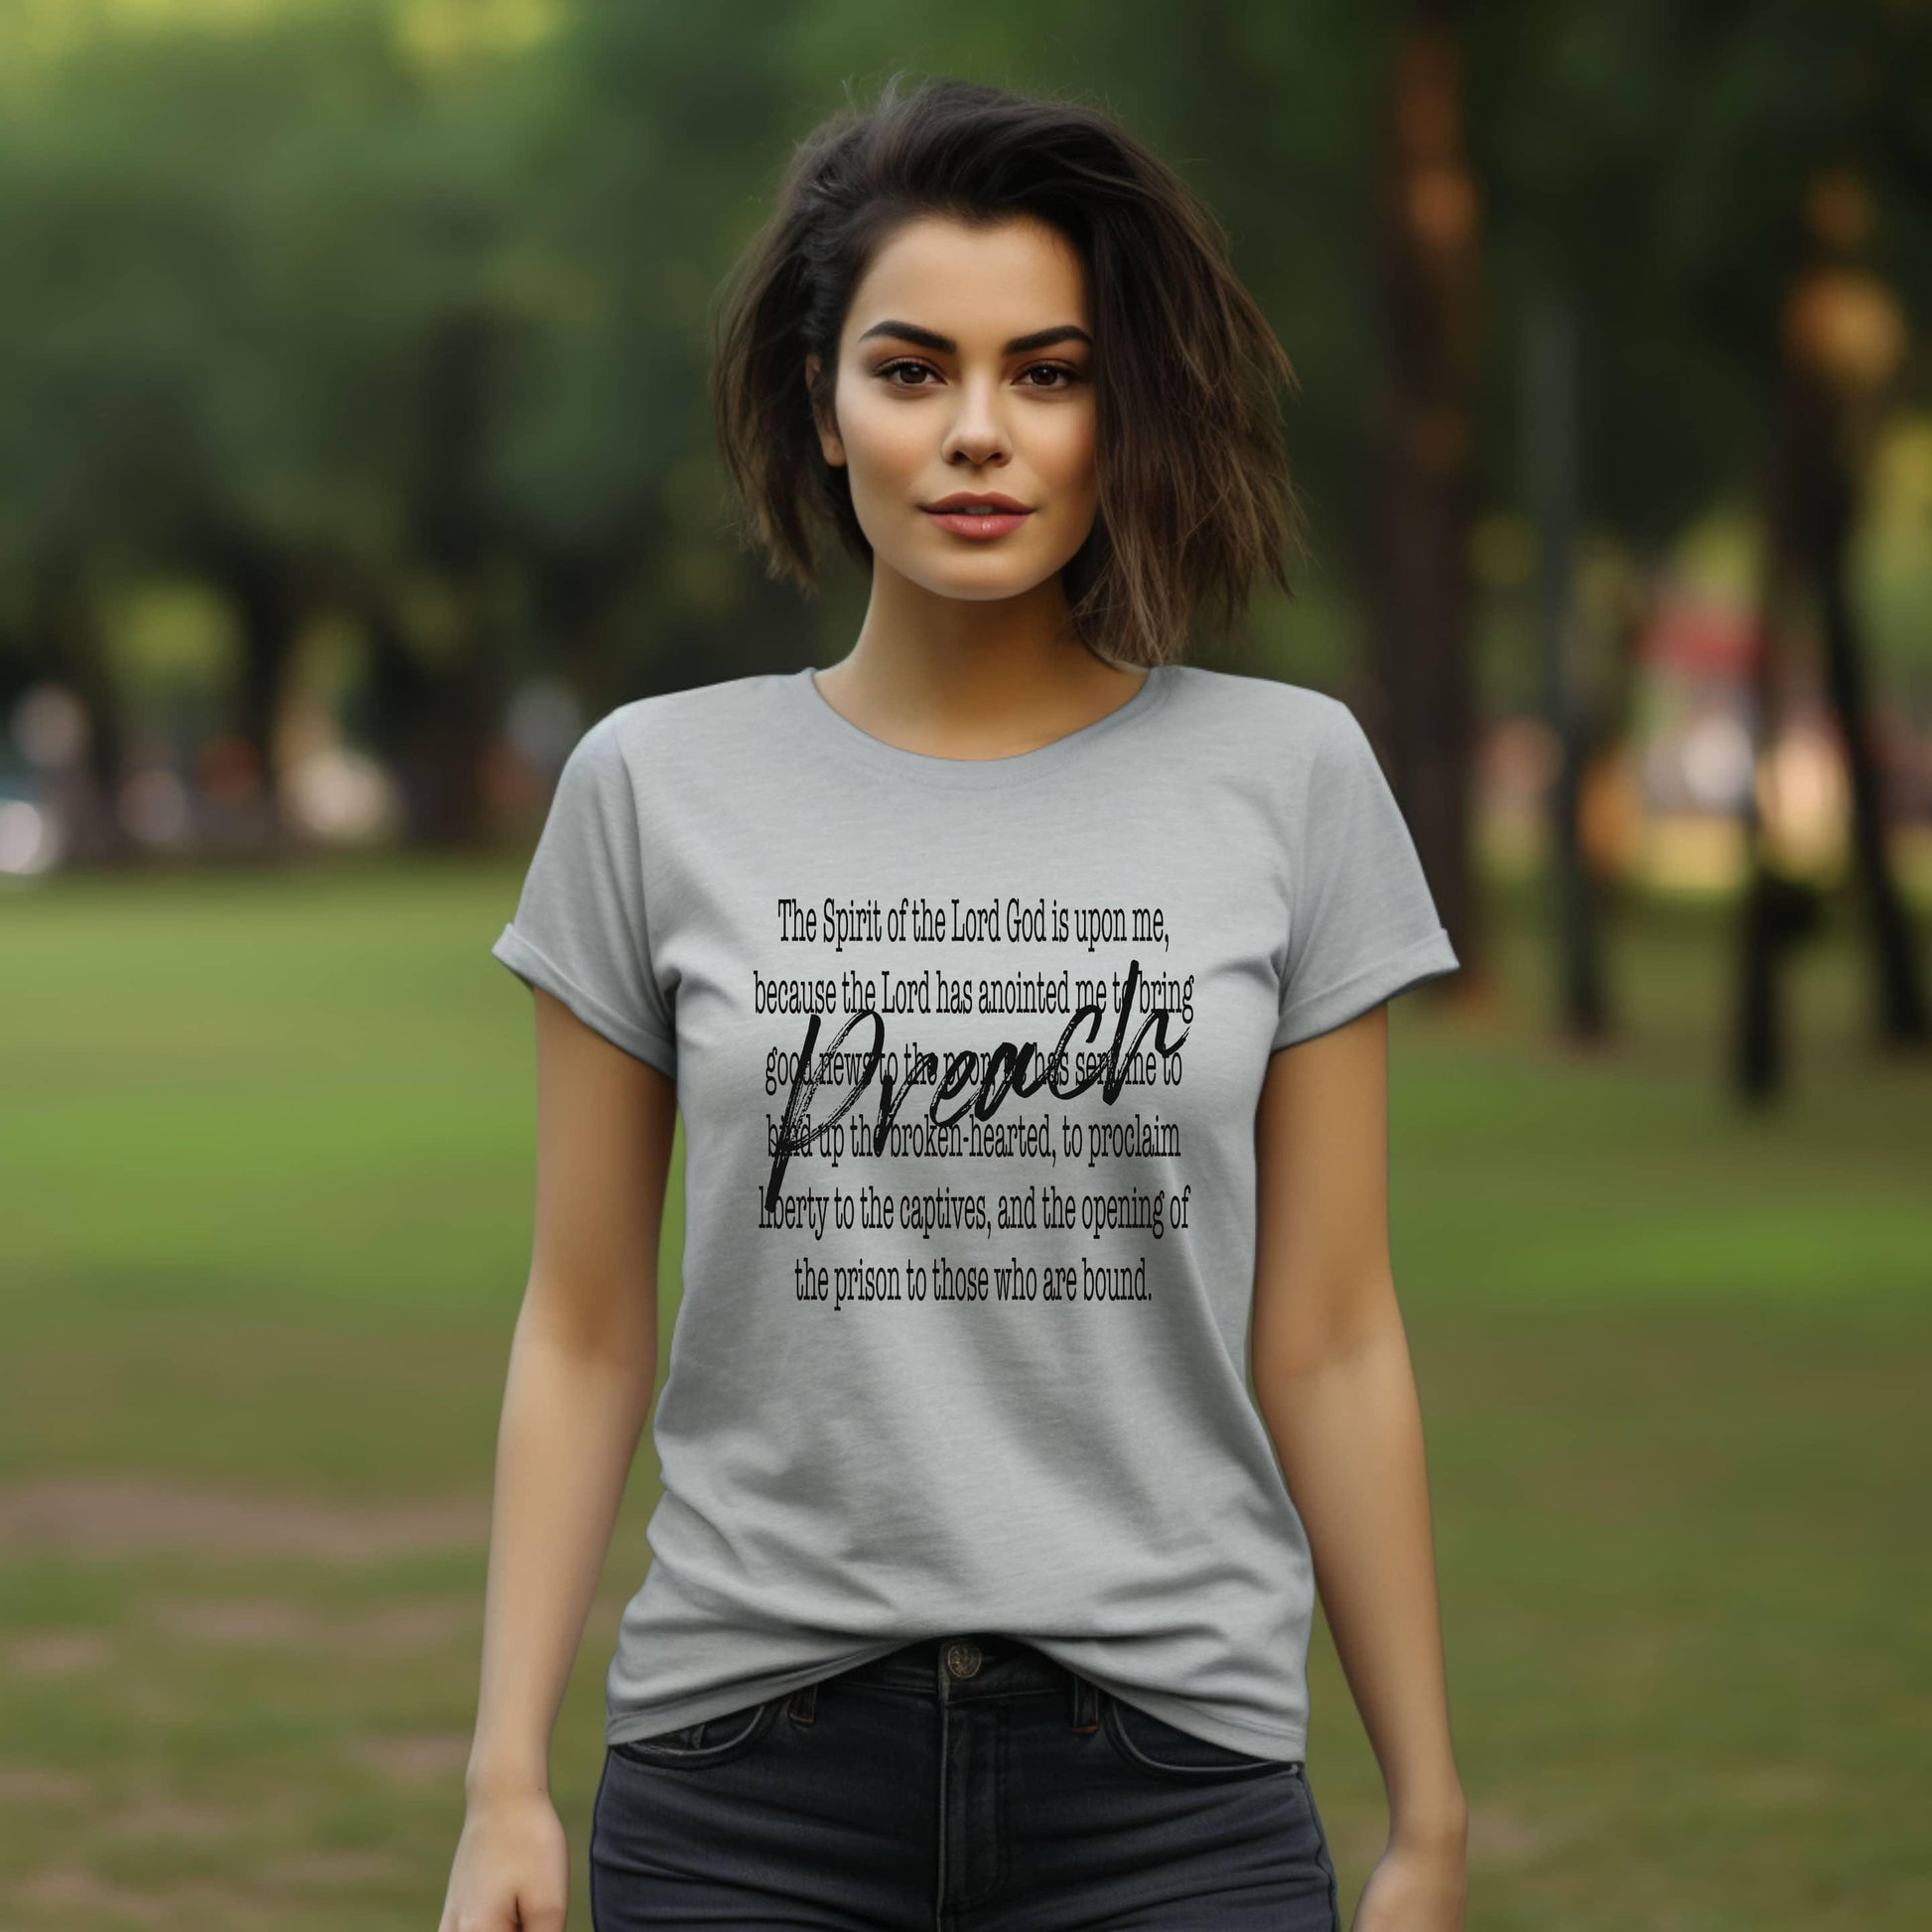 Preach The Spirit Of The Lord Is Upon Me Women’s Tee - JT Footprint Apparel